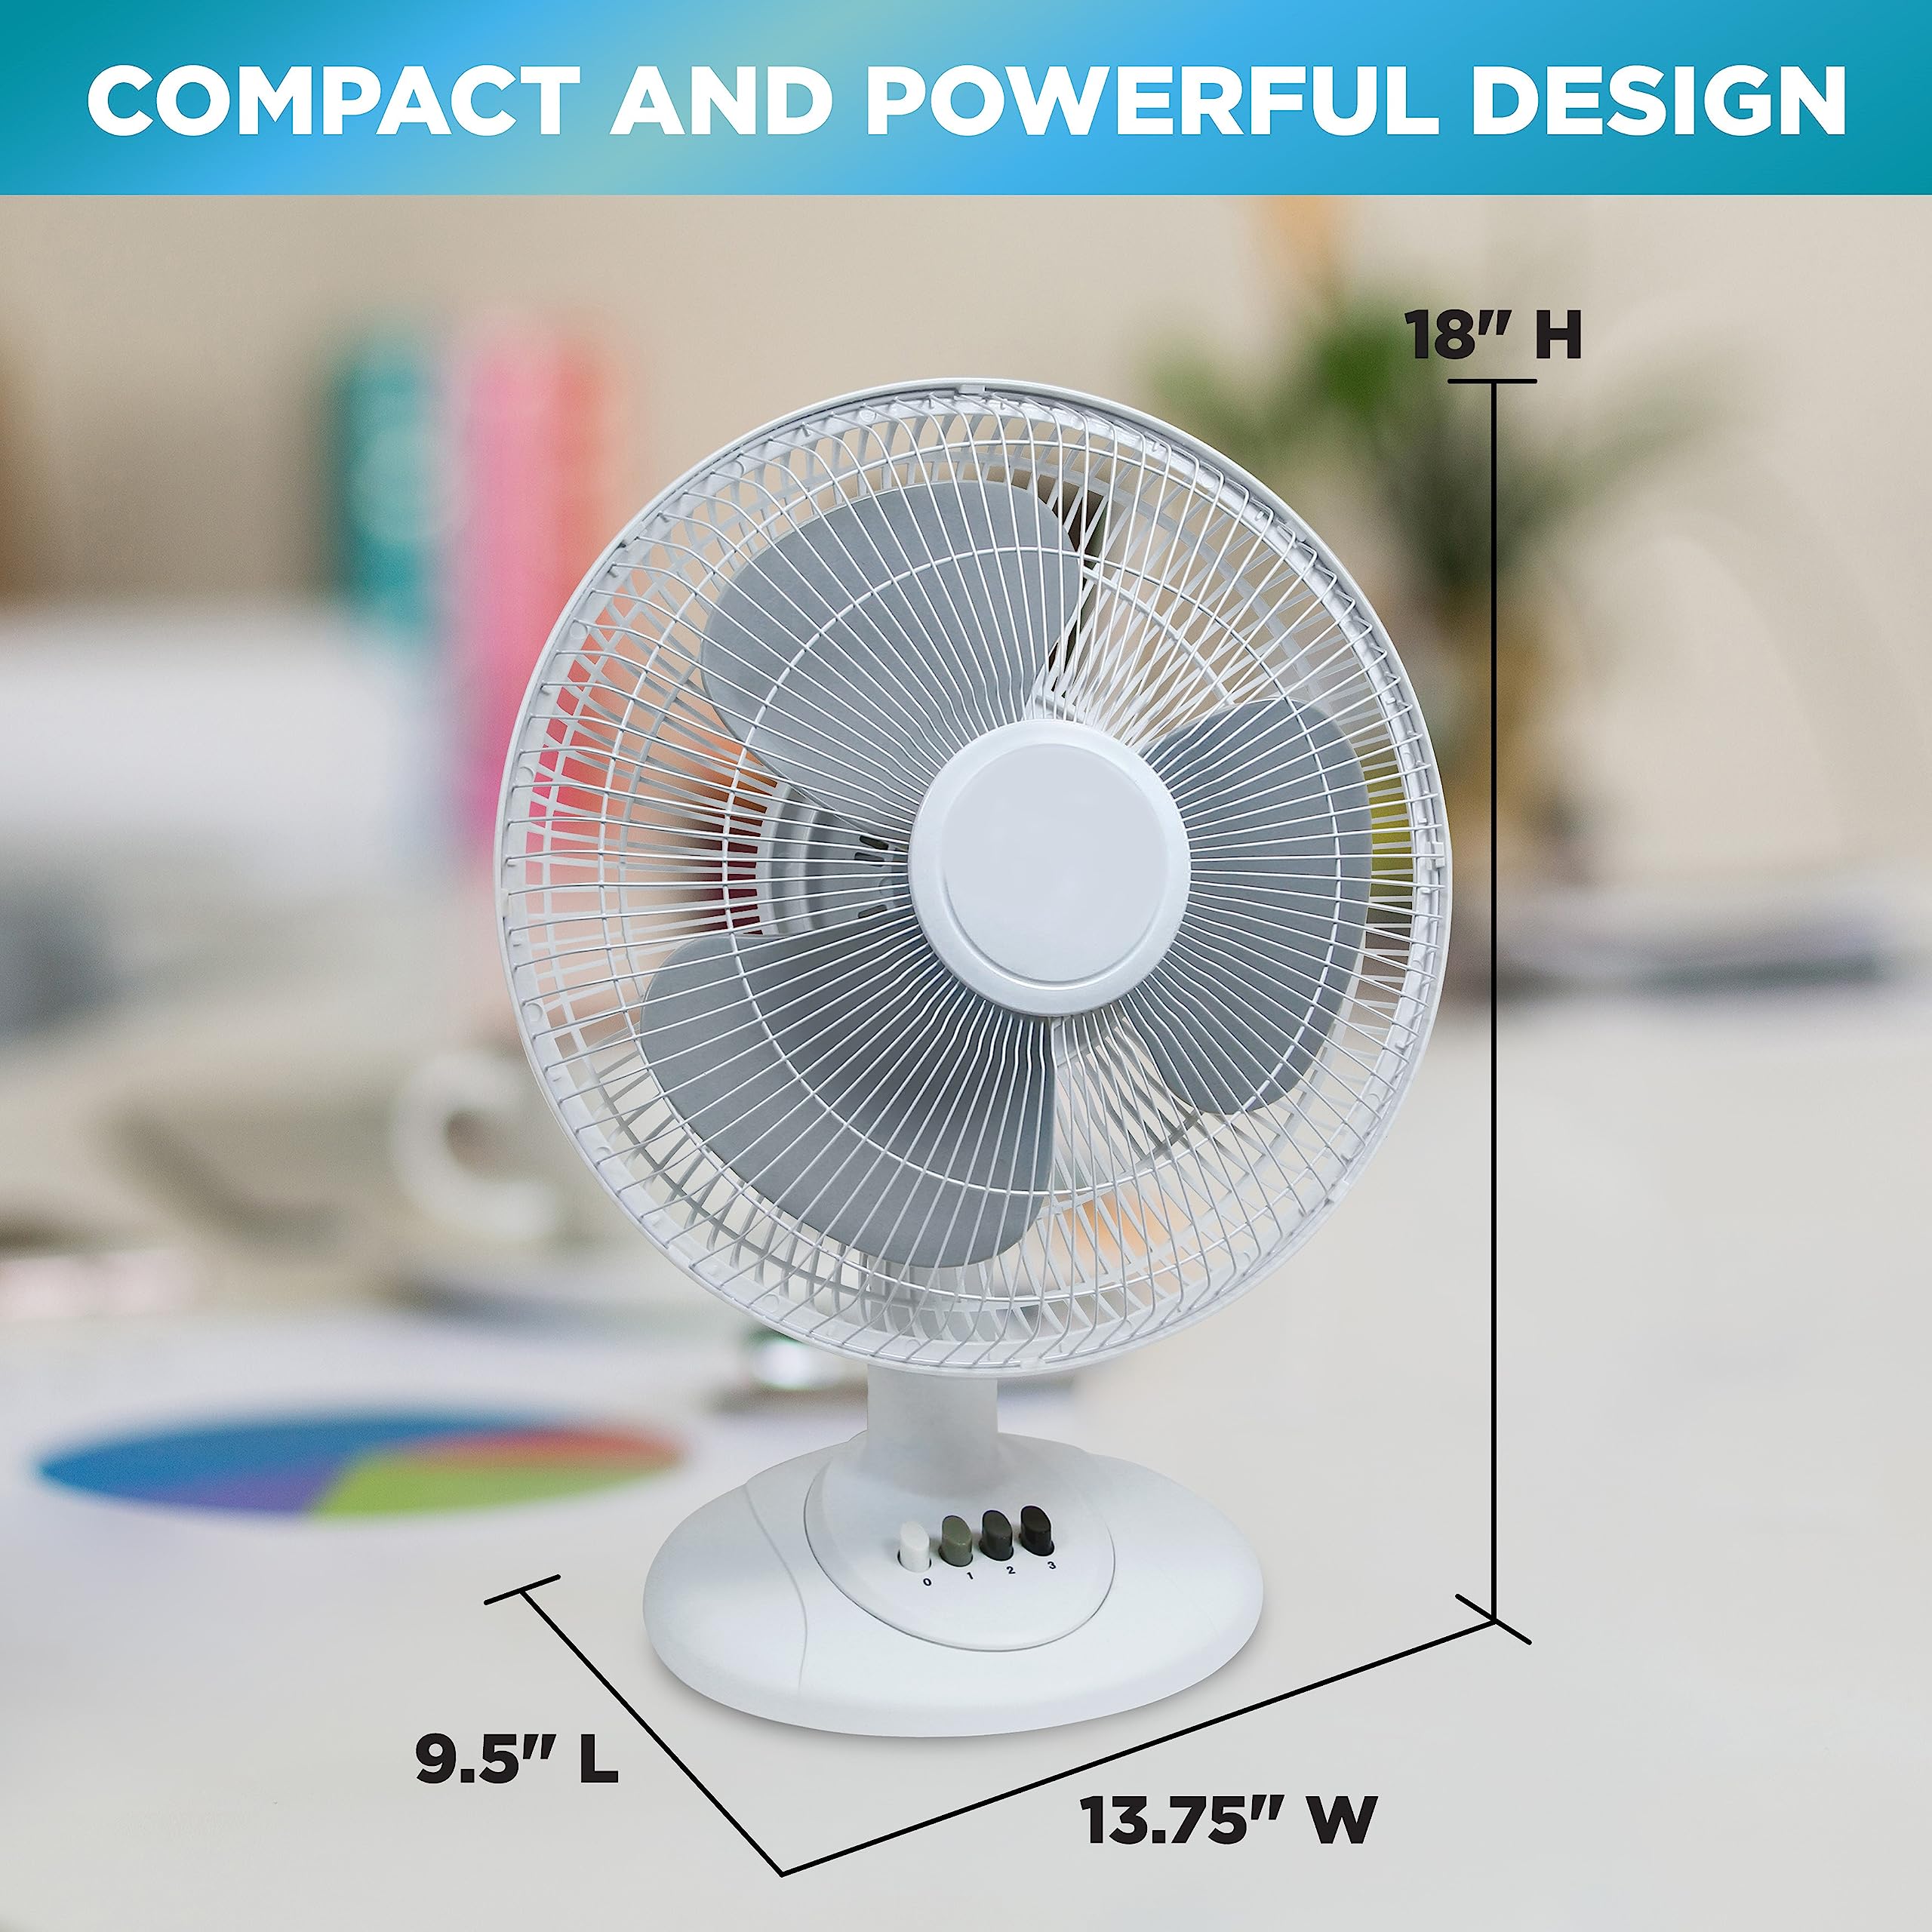 EZ-CHILL 12” 3-Speed Oscillating Table Fan with Adjustable Tilt, Convenient Push Button Controls, Quiet Operation, White, SB-MTSH05